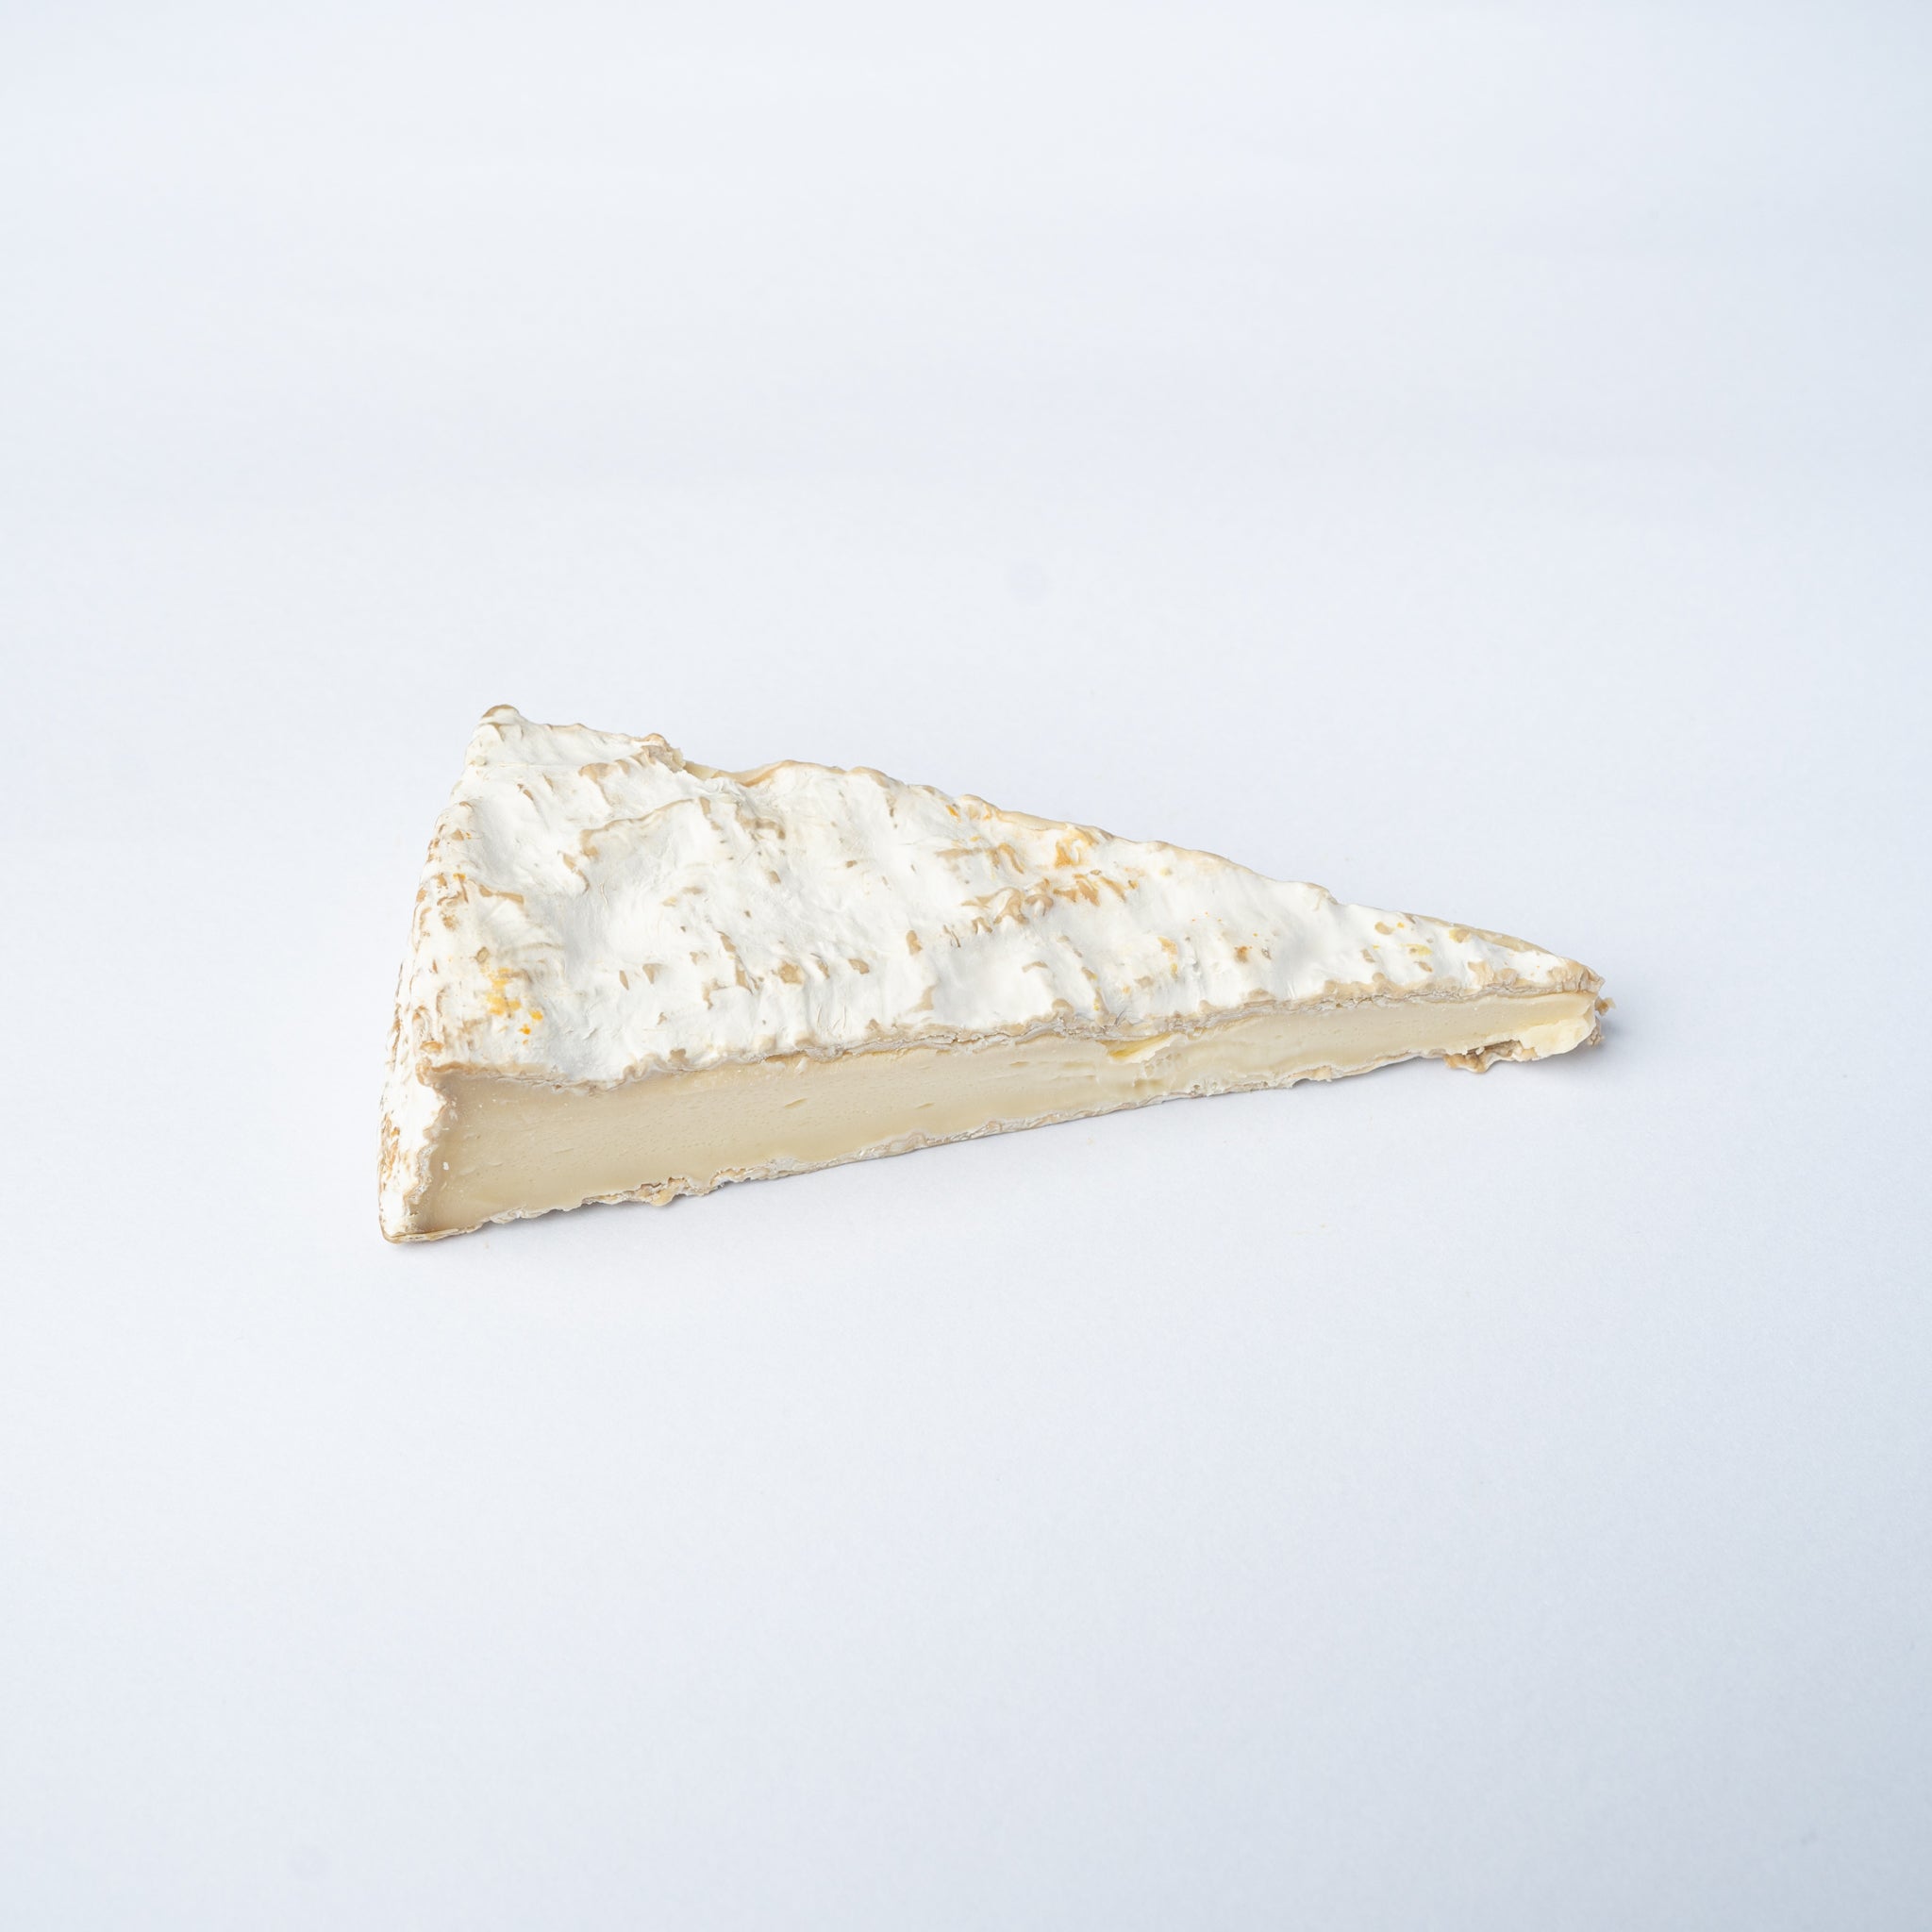 A 200g wedge of Brie de Meaux cheese.